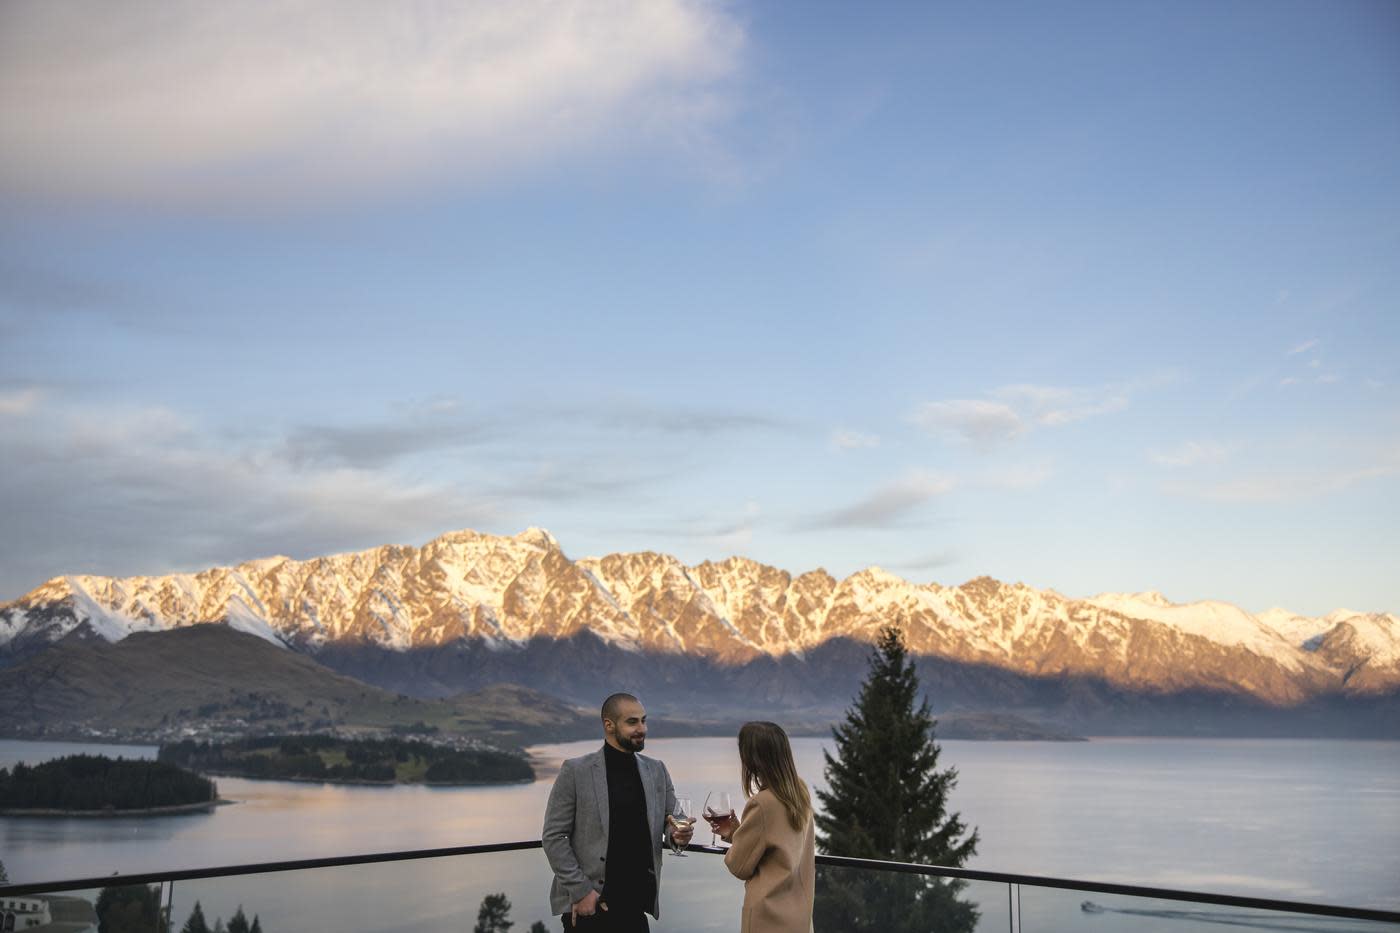 People enoying a wine on the balcony of Nest Kitchen and Bar overlooking the snow-covered Remarkables mountain range